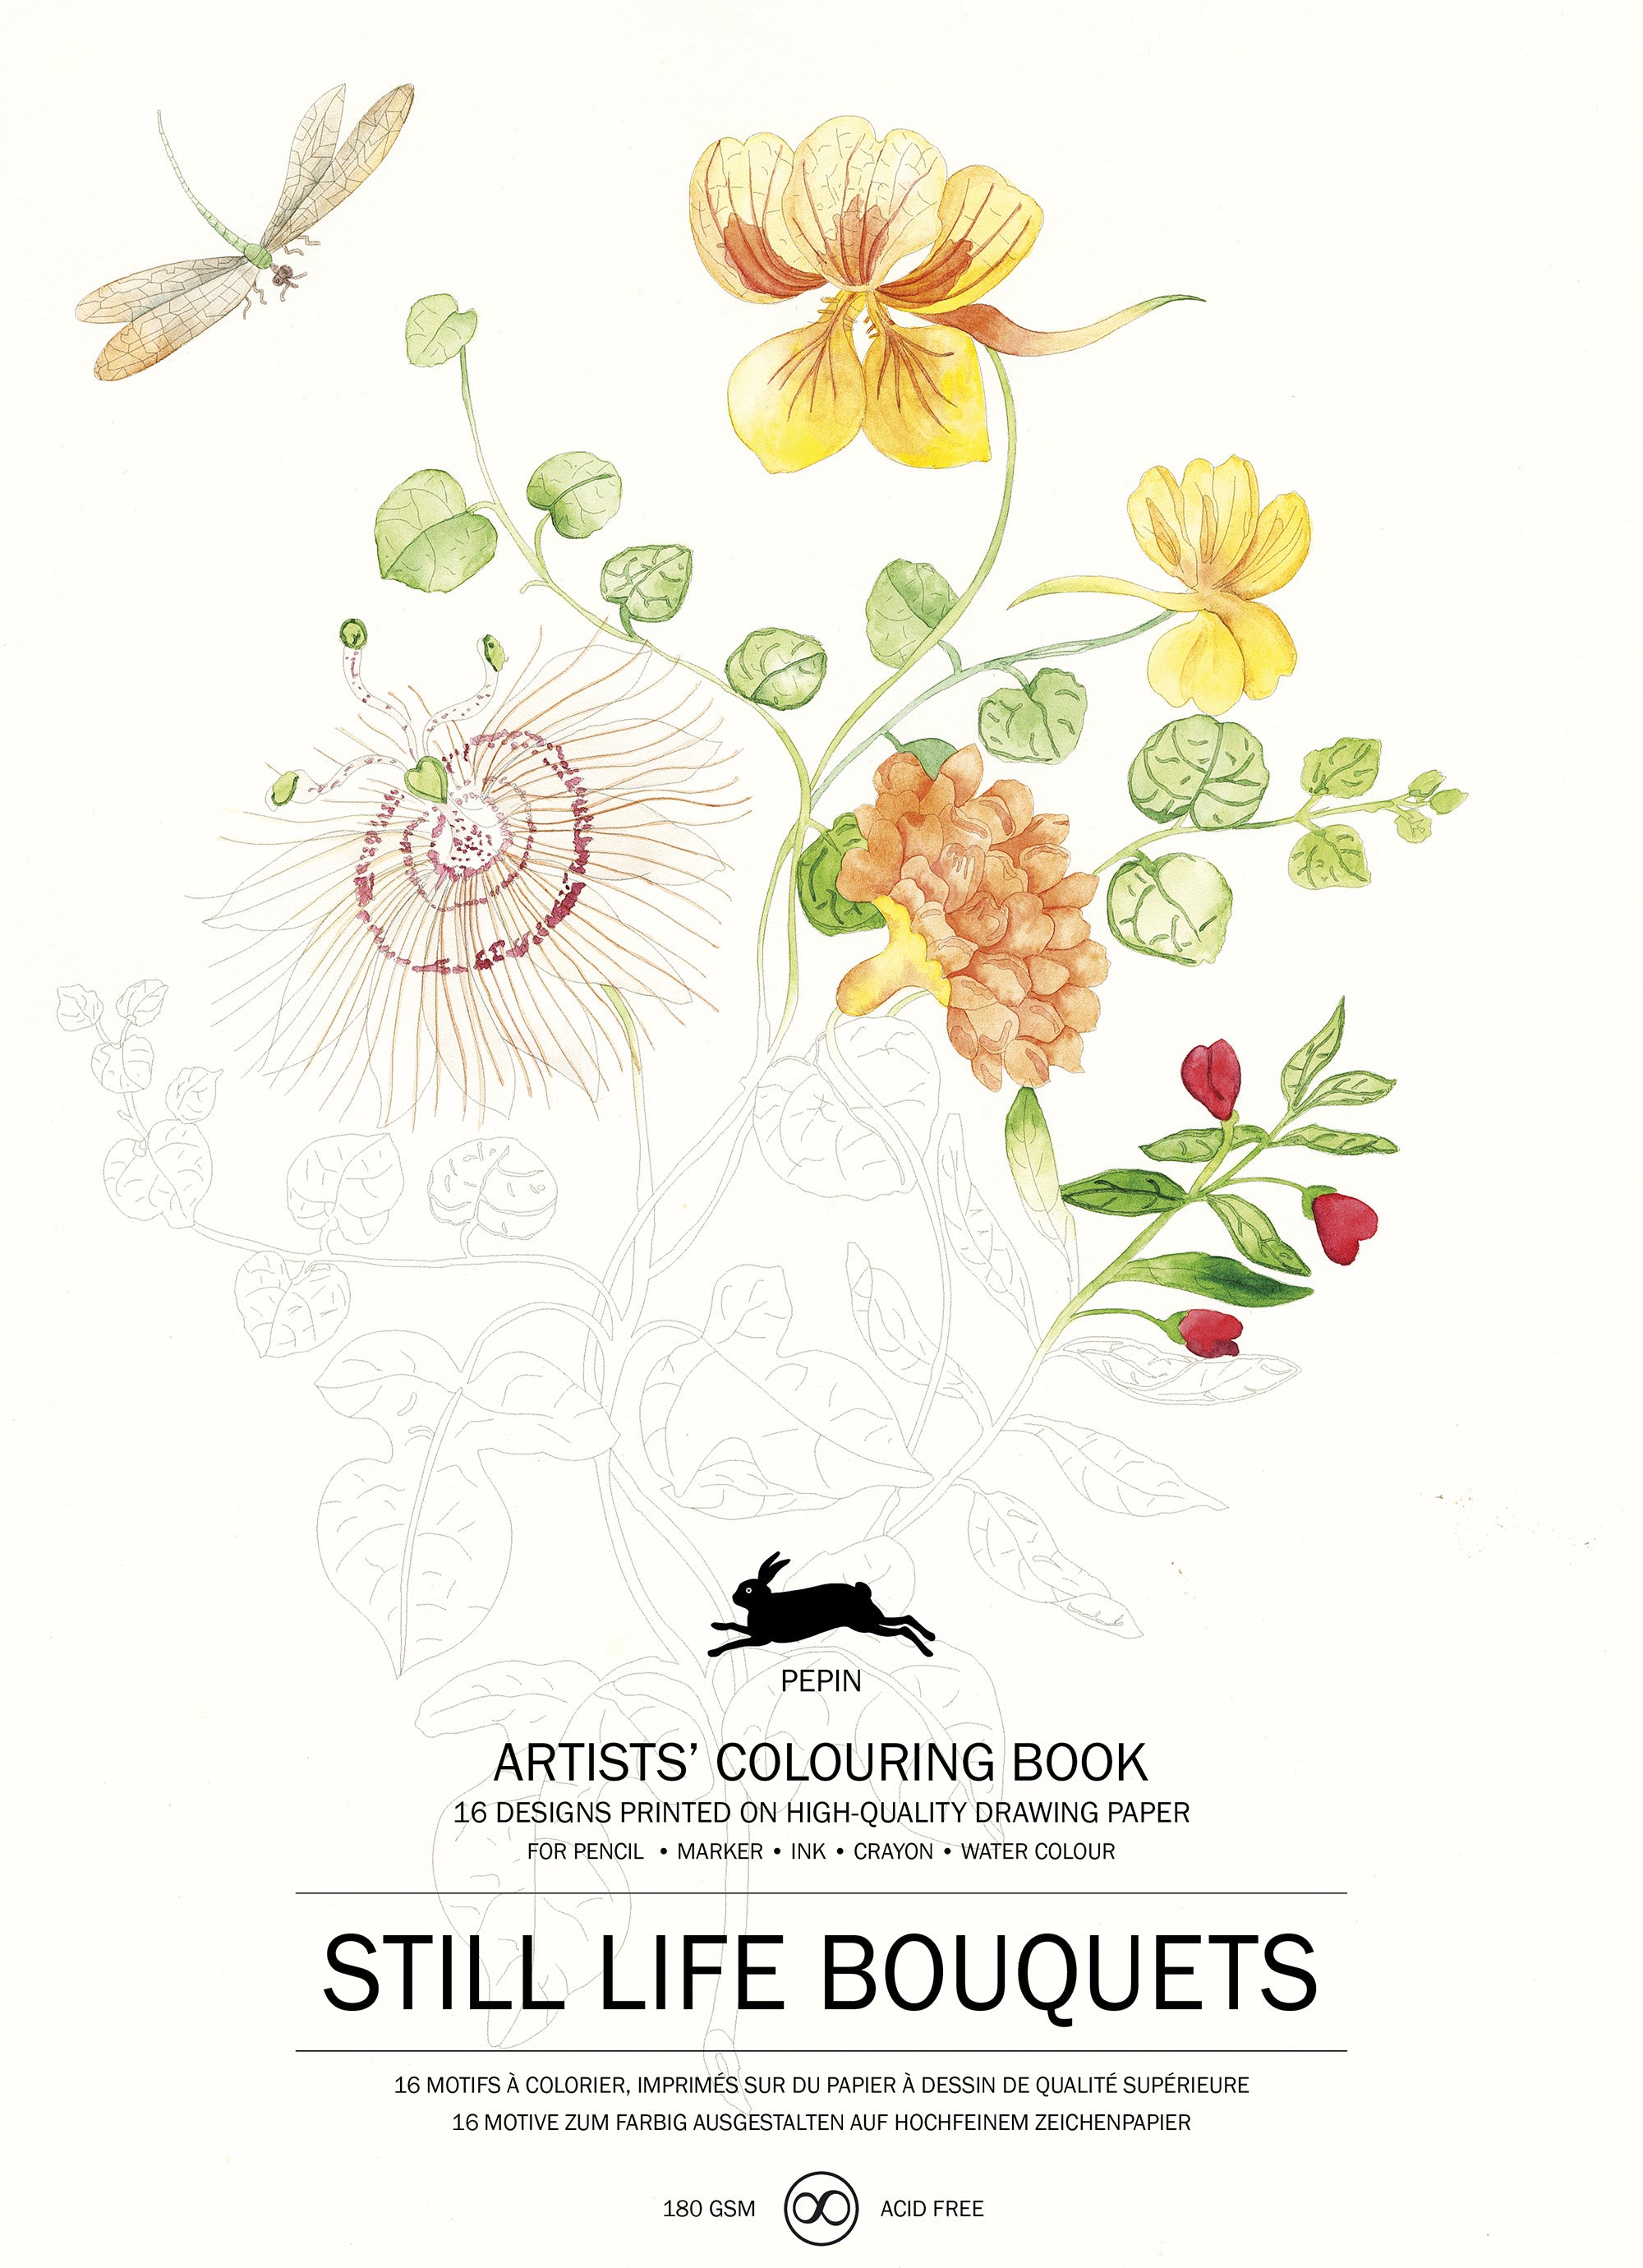 Artists’ Colouring Book - Still Life Bouquets